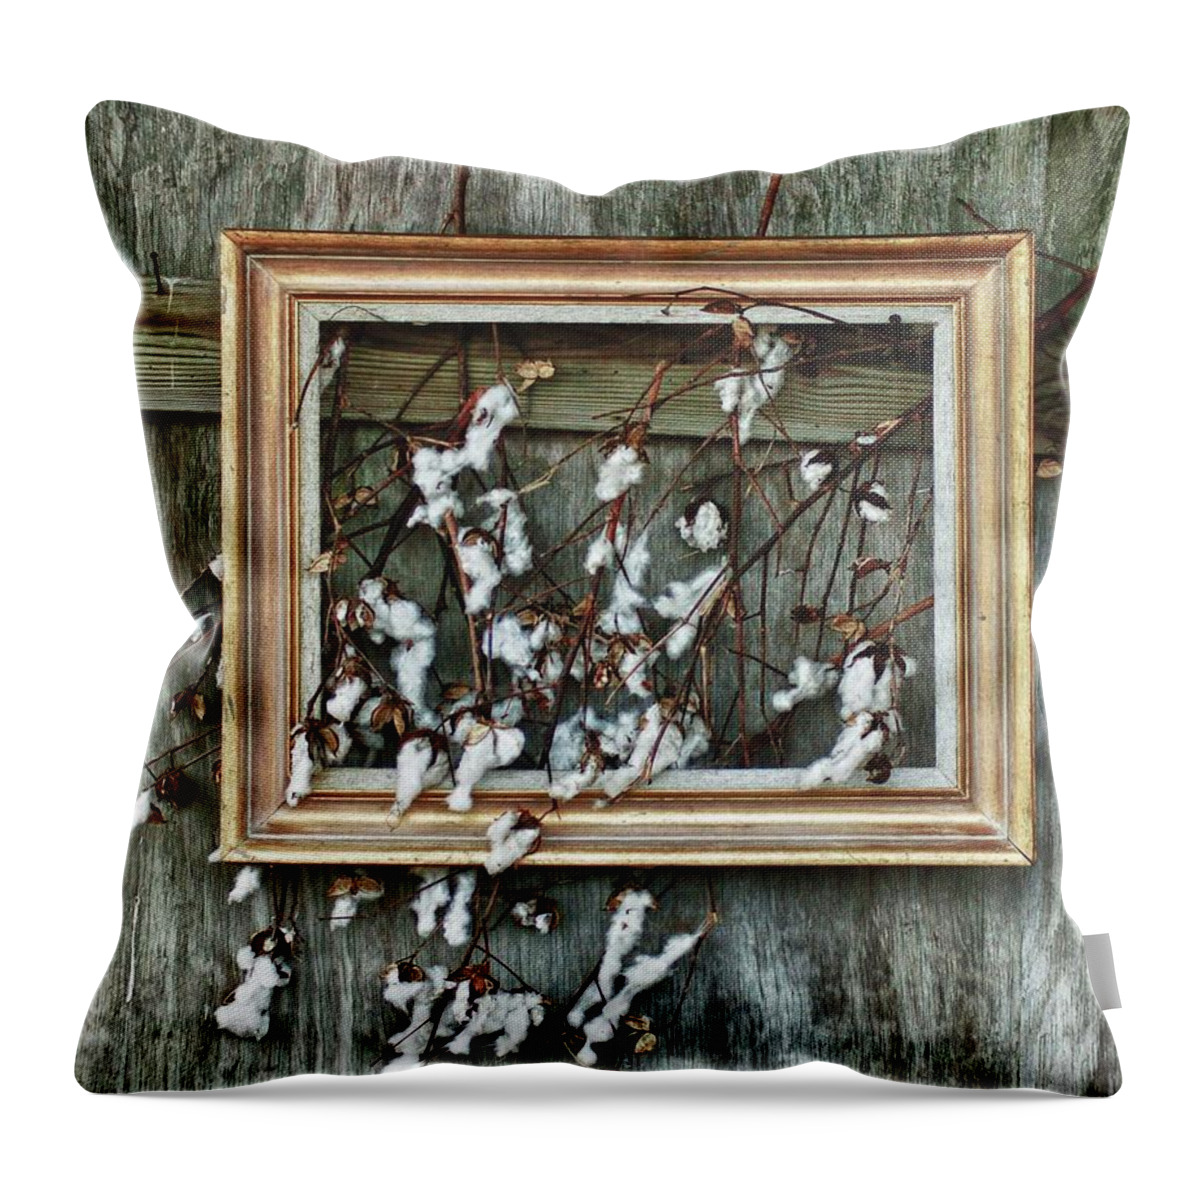 Black And White Throw Pillow featuring the painting Framed Cotton by Michael Thomas